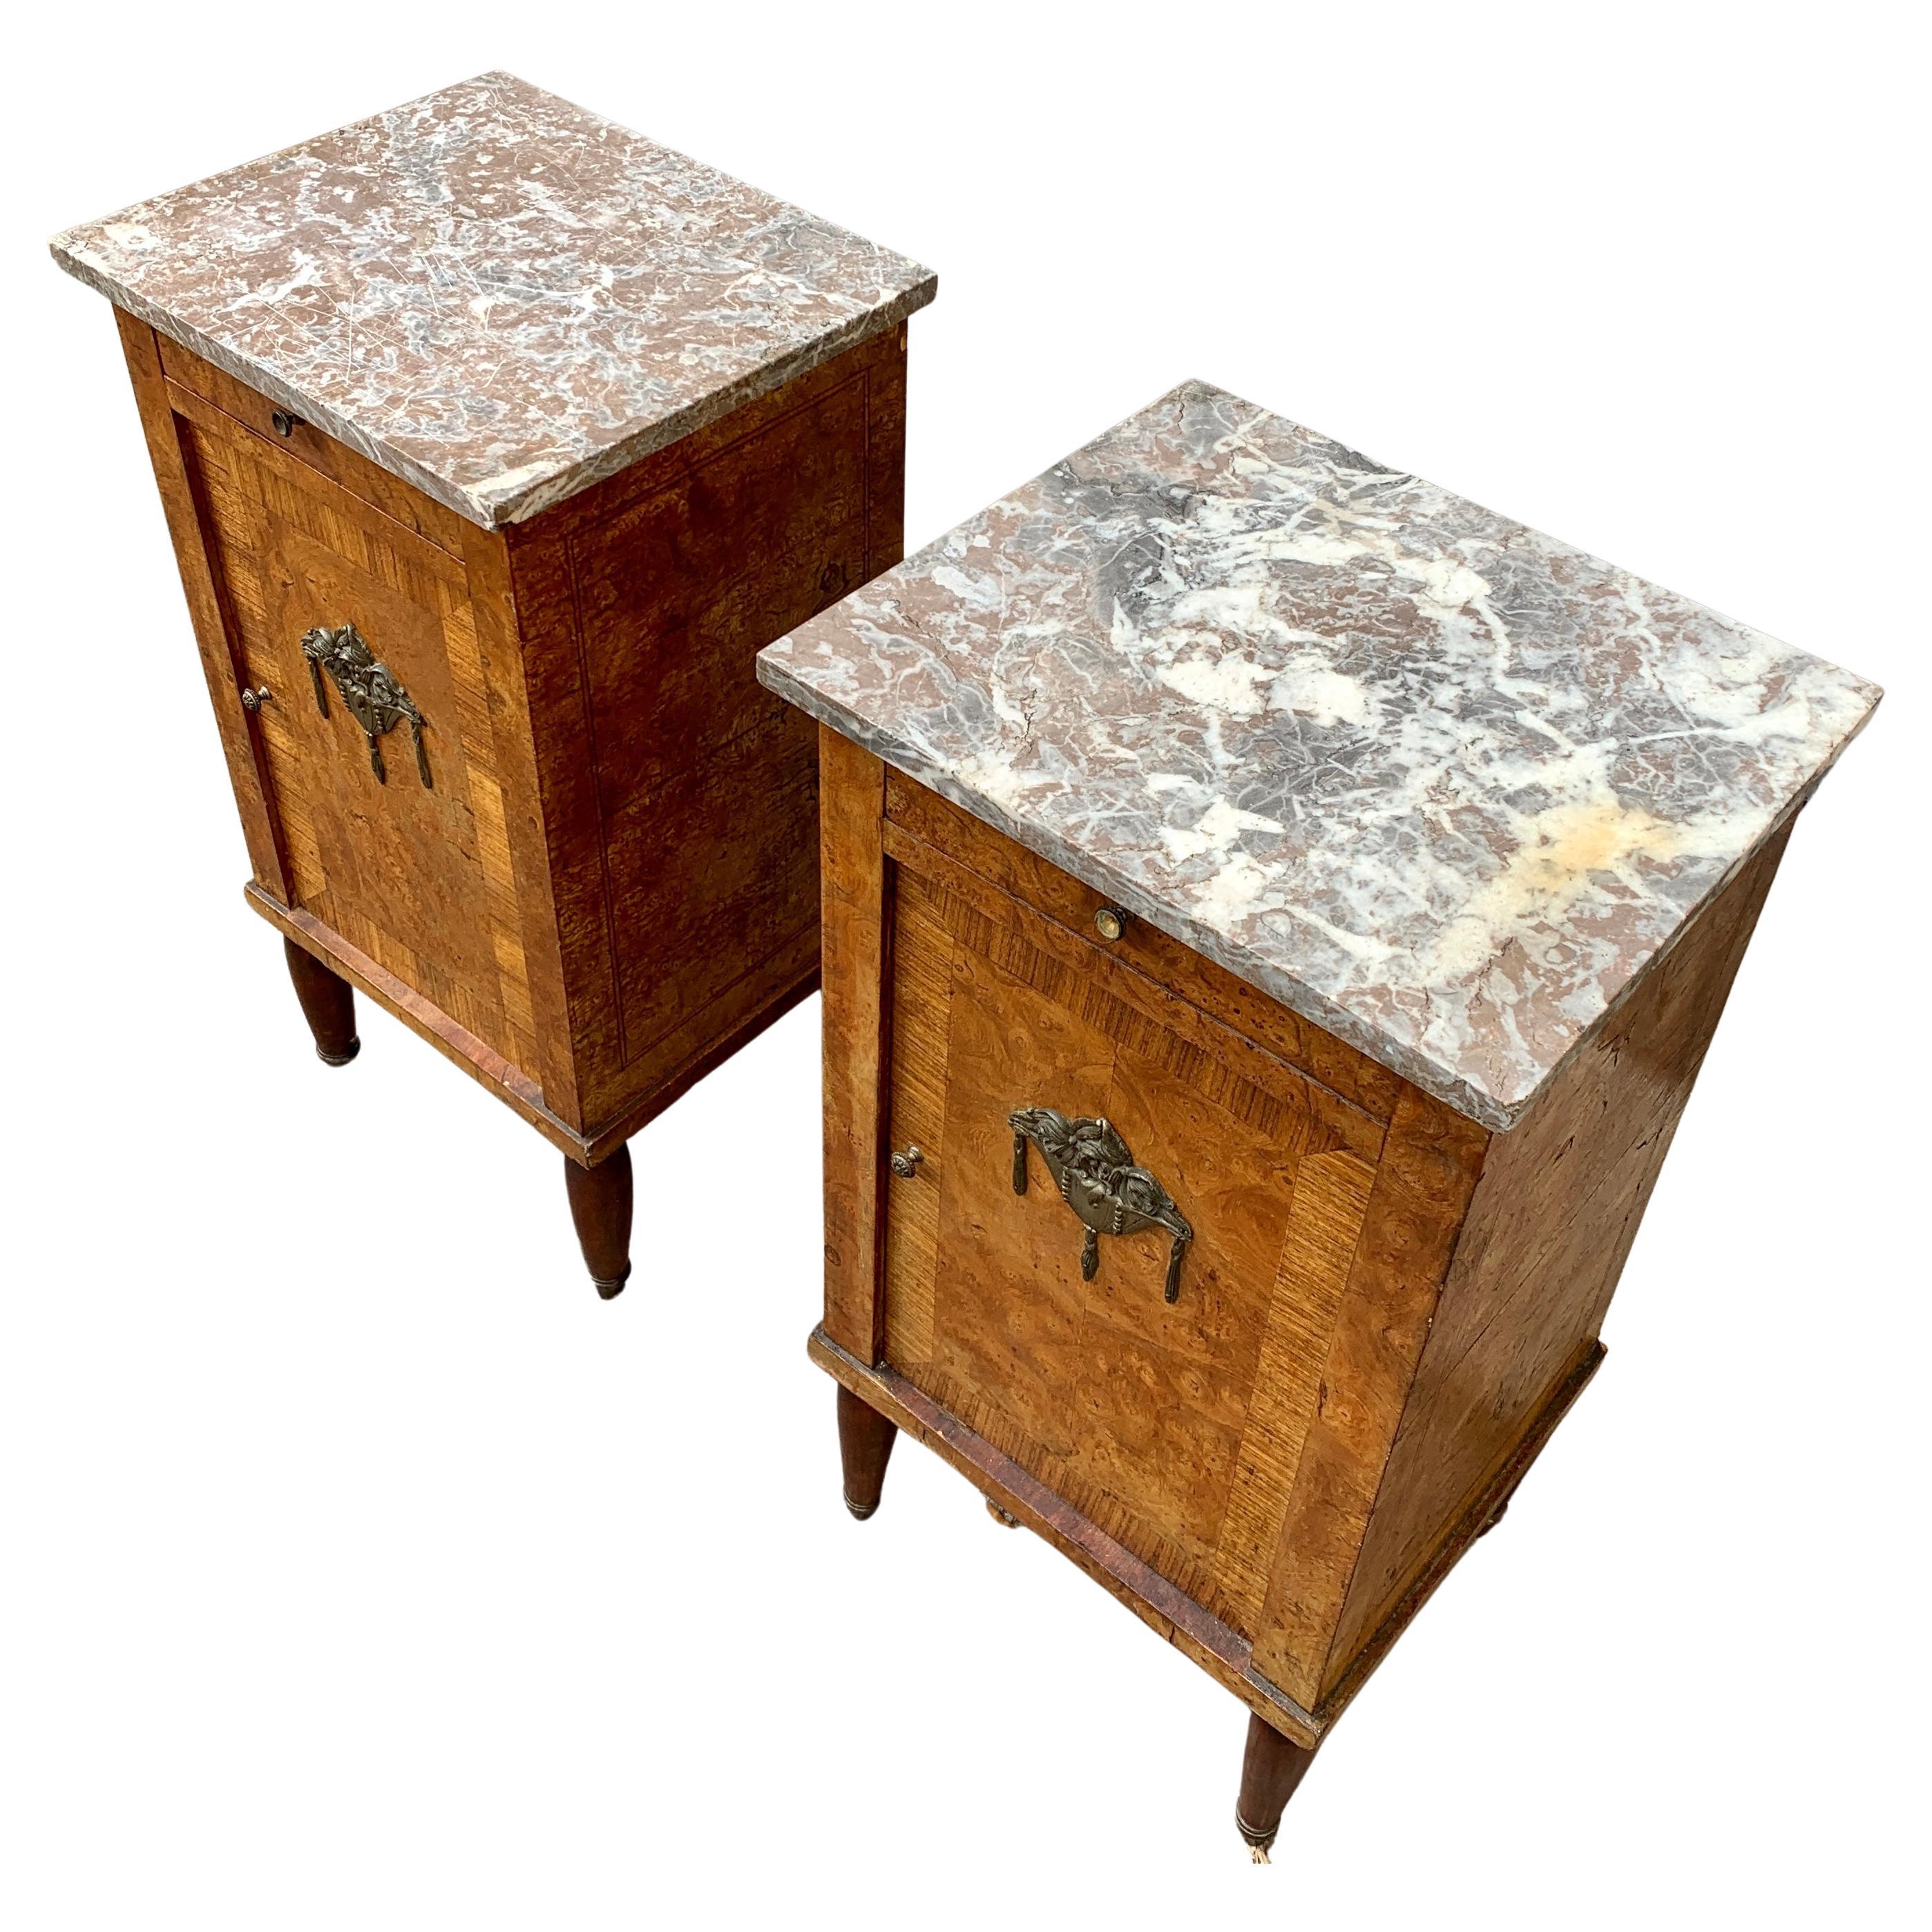 A pair of early 20th Century French nightstands or night tables in walnut, walnut root and citrus wood with marquetry work. The french marble tops are loose. That will not effect stability when put on the nightstands cause their weight keep them